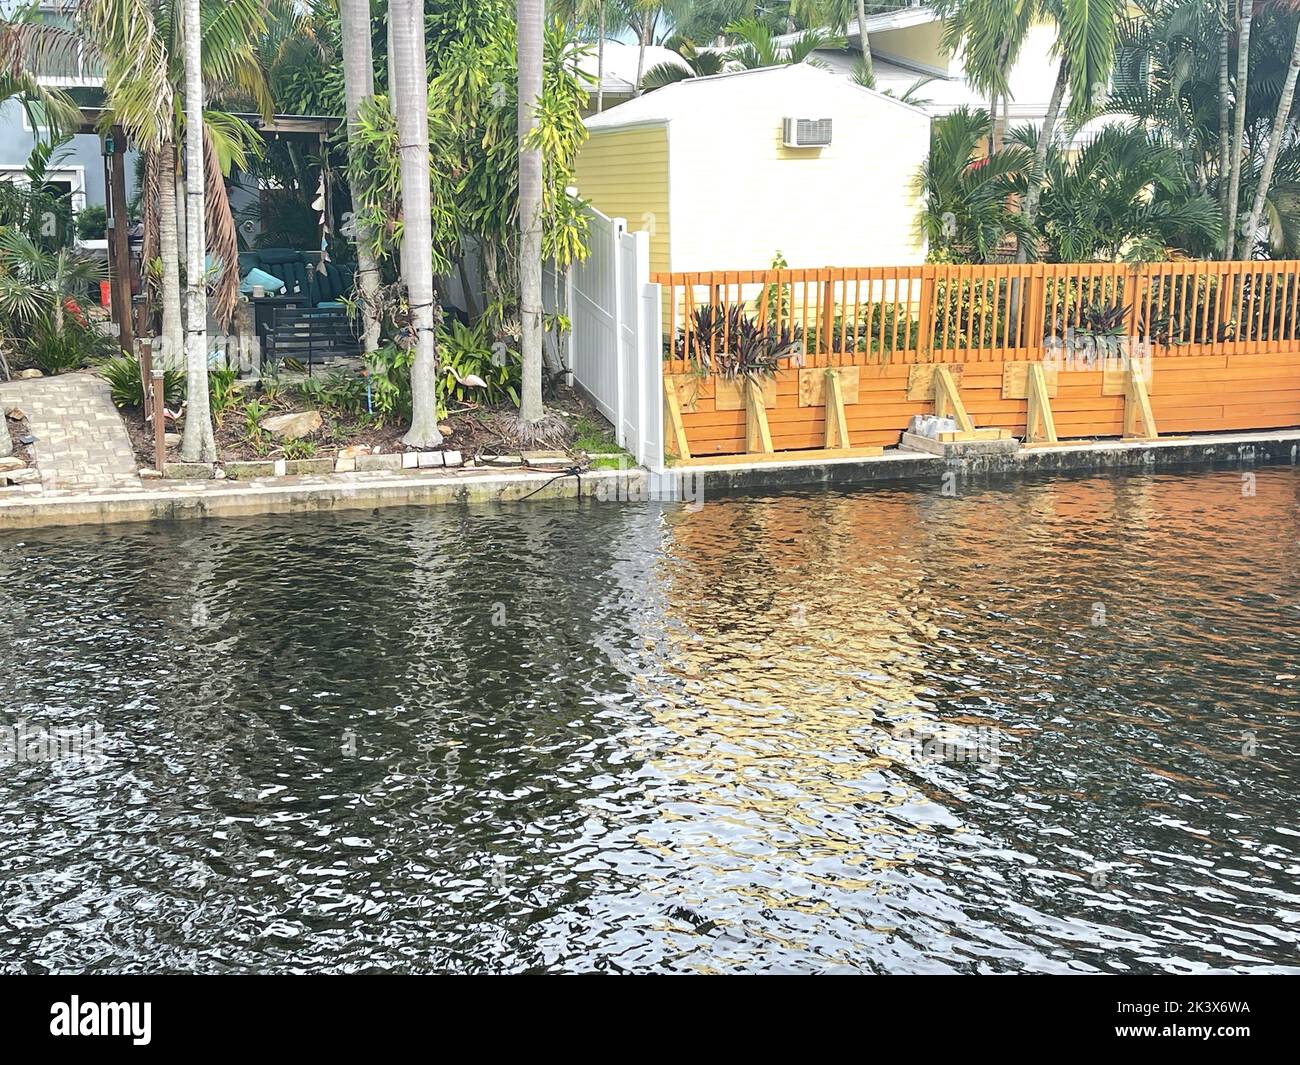 United States Of America. 28th Sep, 2022. FORT LAUDERDALE, FL - SEPTEMBER 22: King tides add to flooding concerns in Fort Lauderdale as Hurricane Ian makes landfall in Florida as dangerous Category 4 hurricane on September 28, 2022 in Fort Lauderdale, Florida People: Credit: Storms Media Group/Alamy Live News Stock Photo